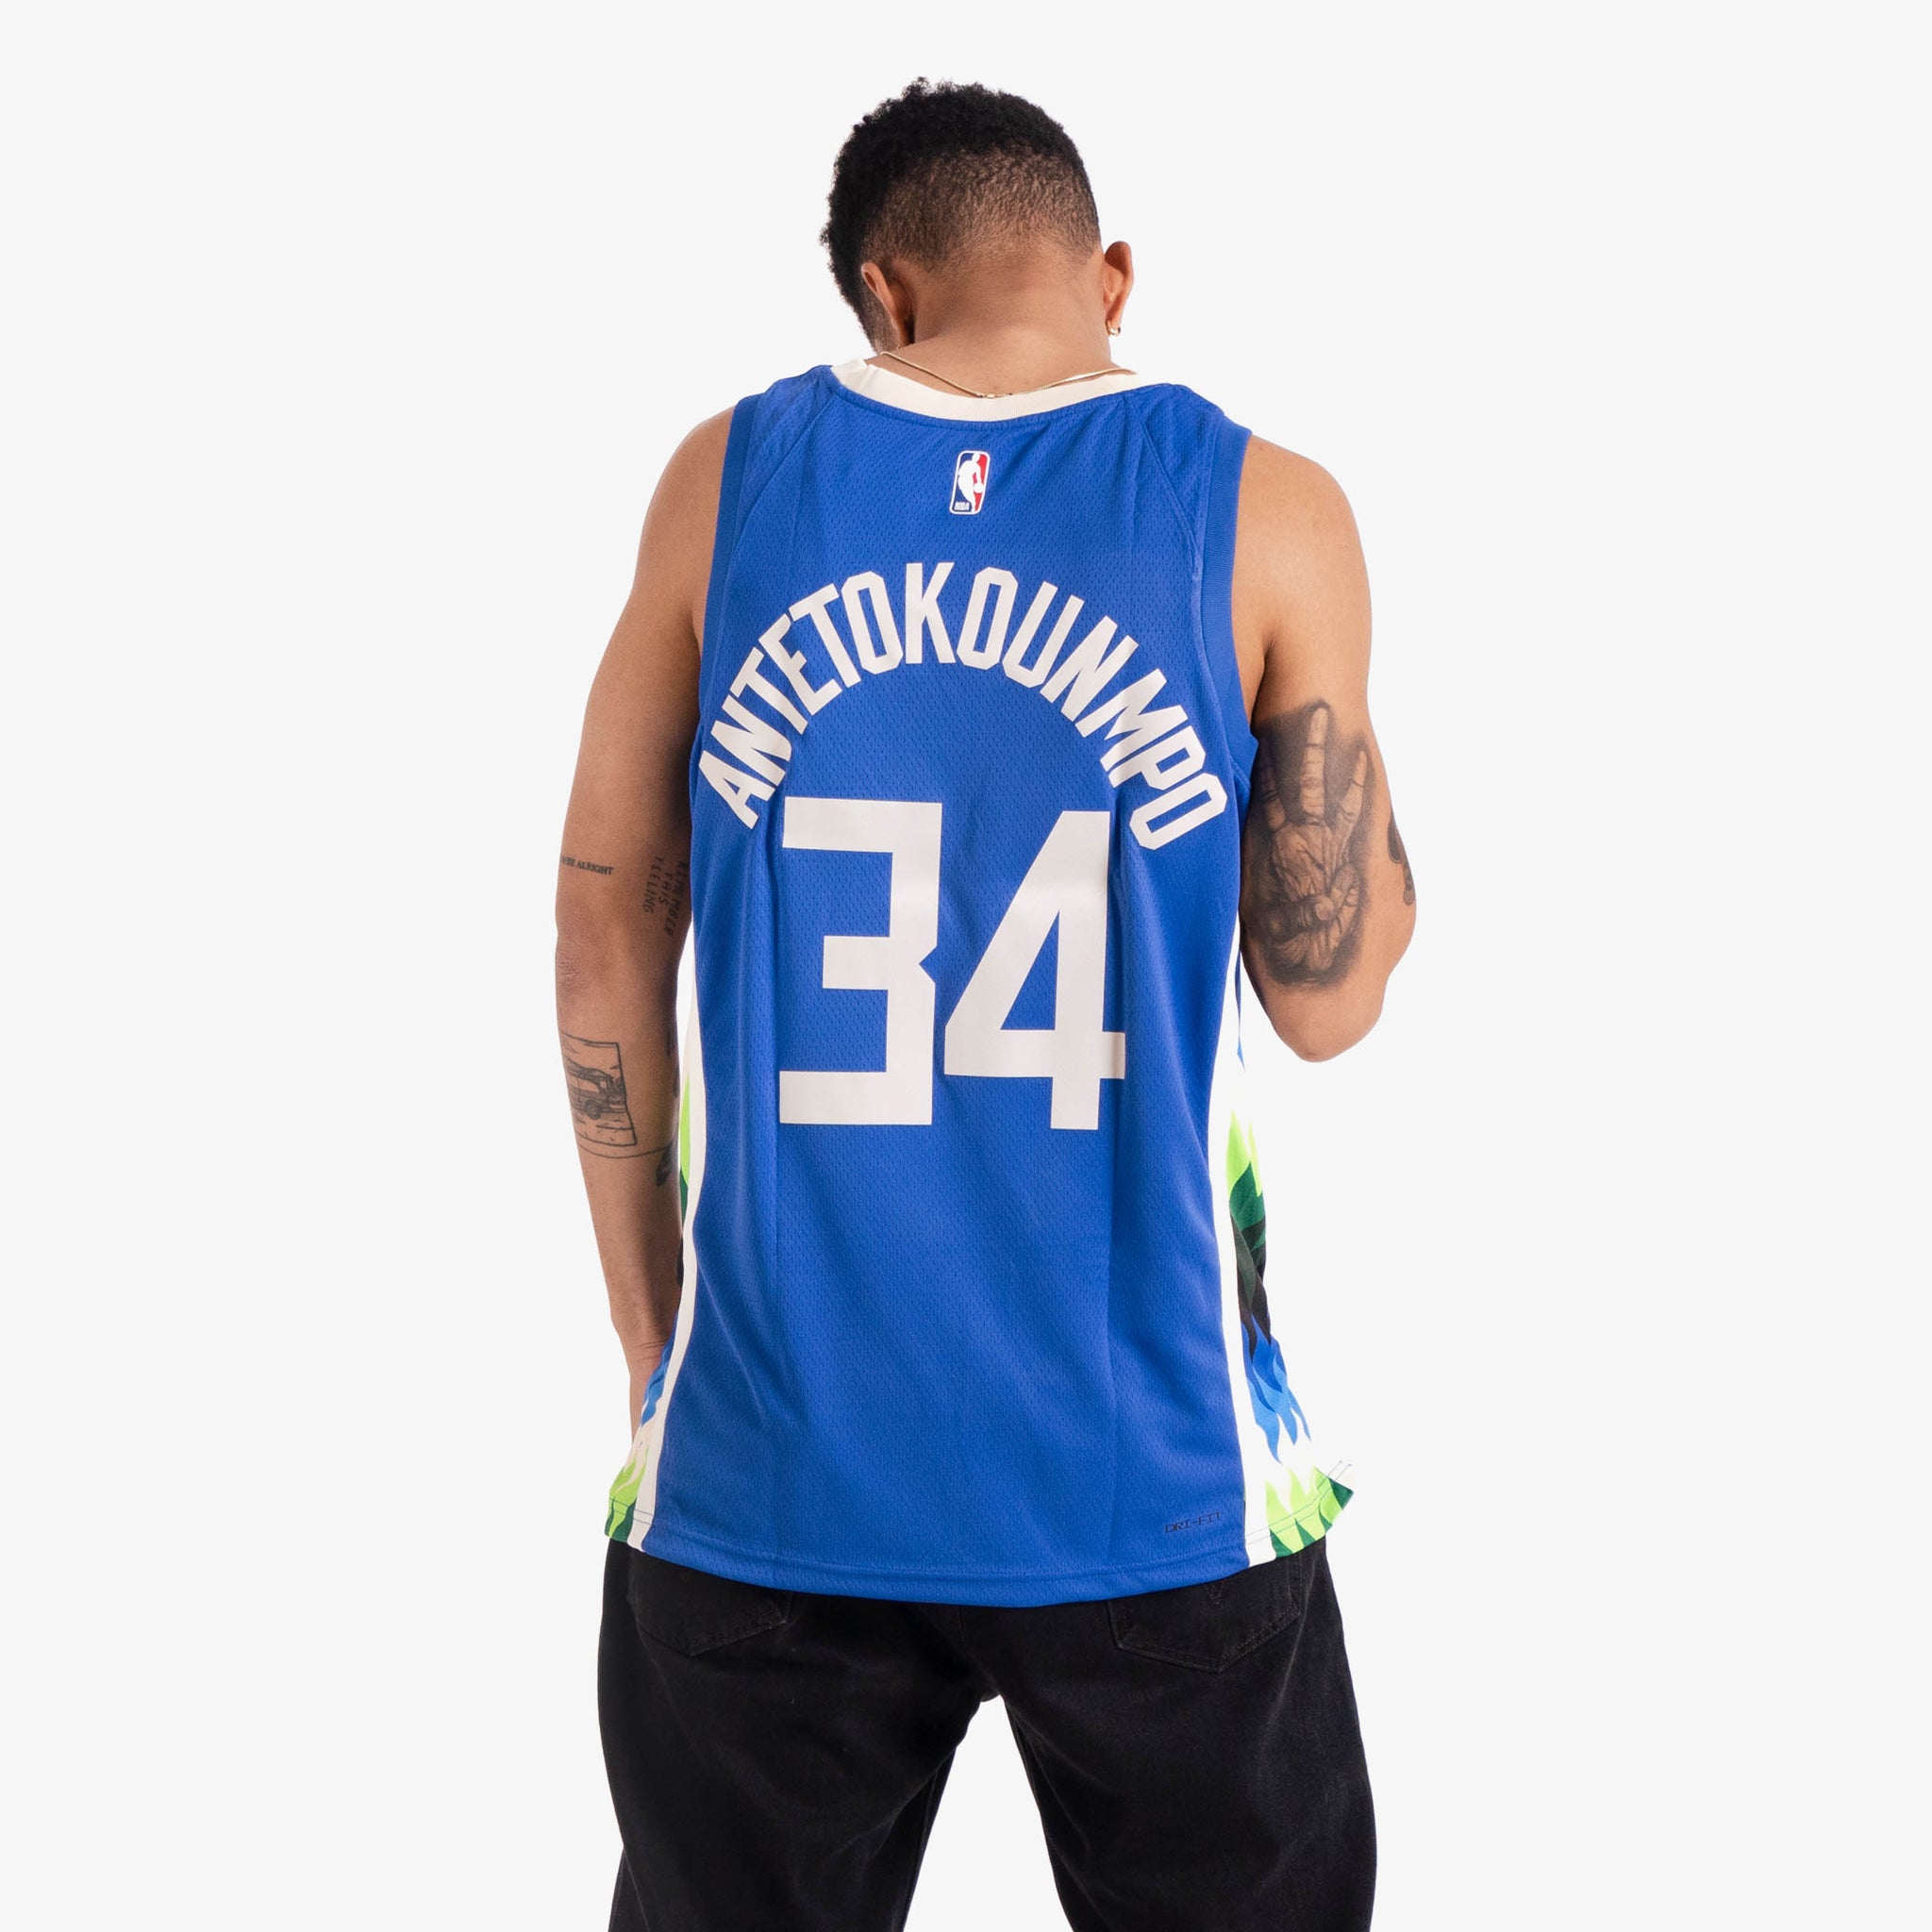 giannis city jersey